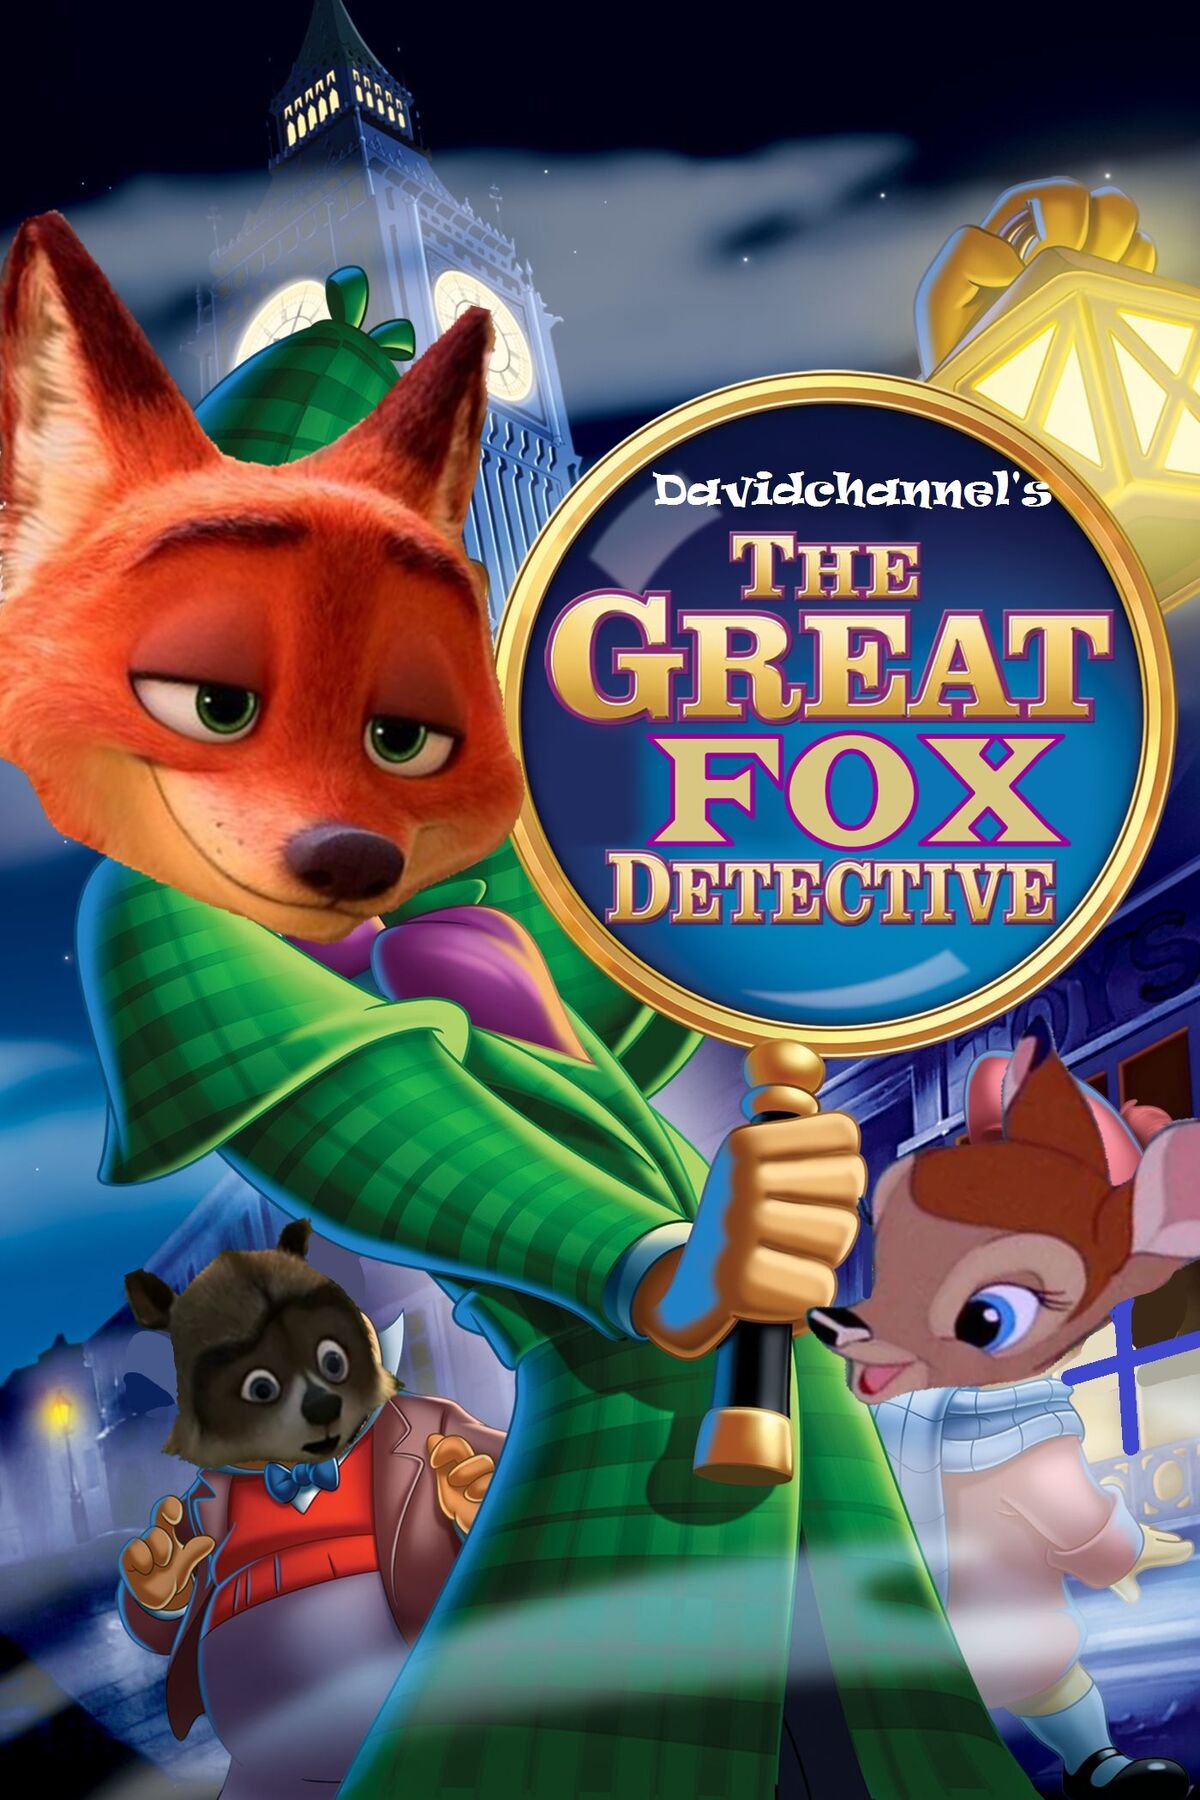 The Great Fox Detective (1986) | Davidchannel and Spoofers